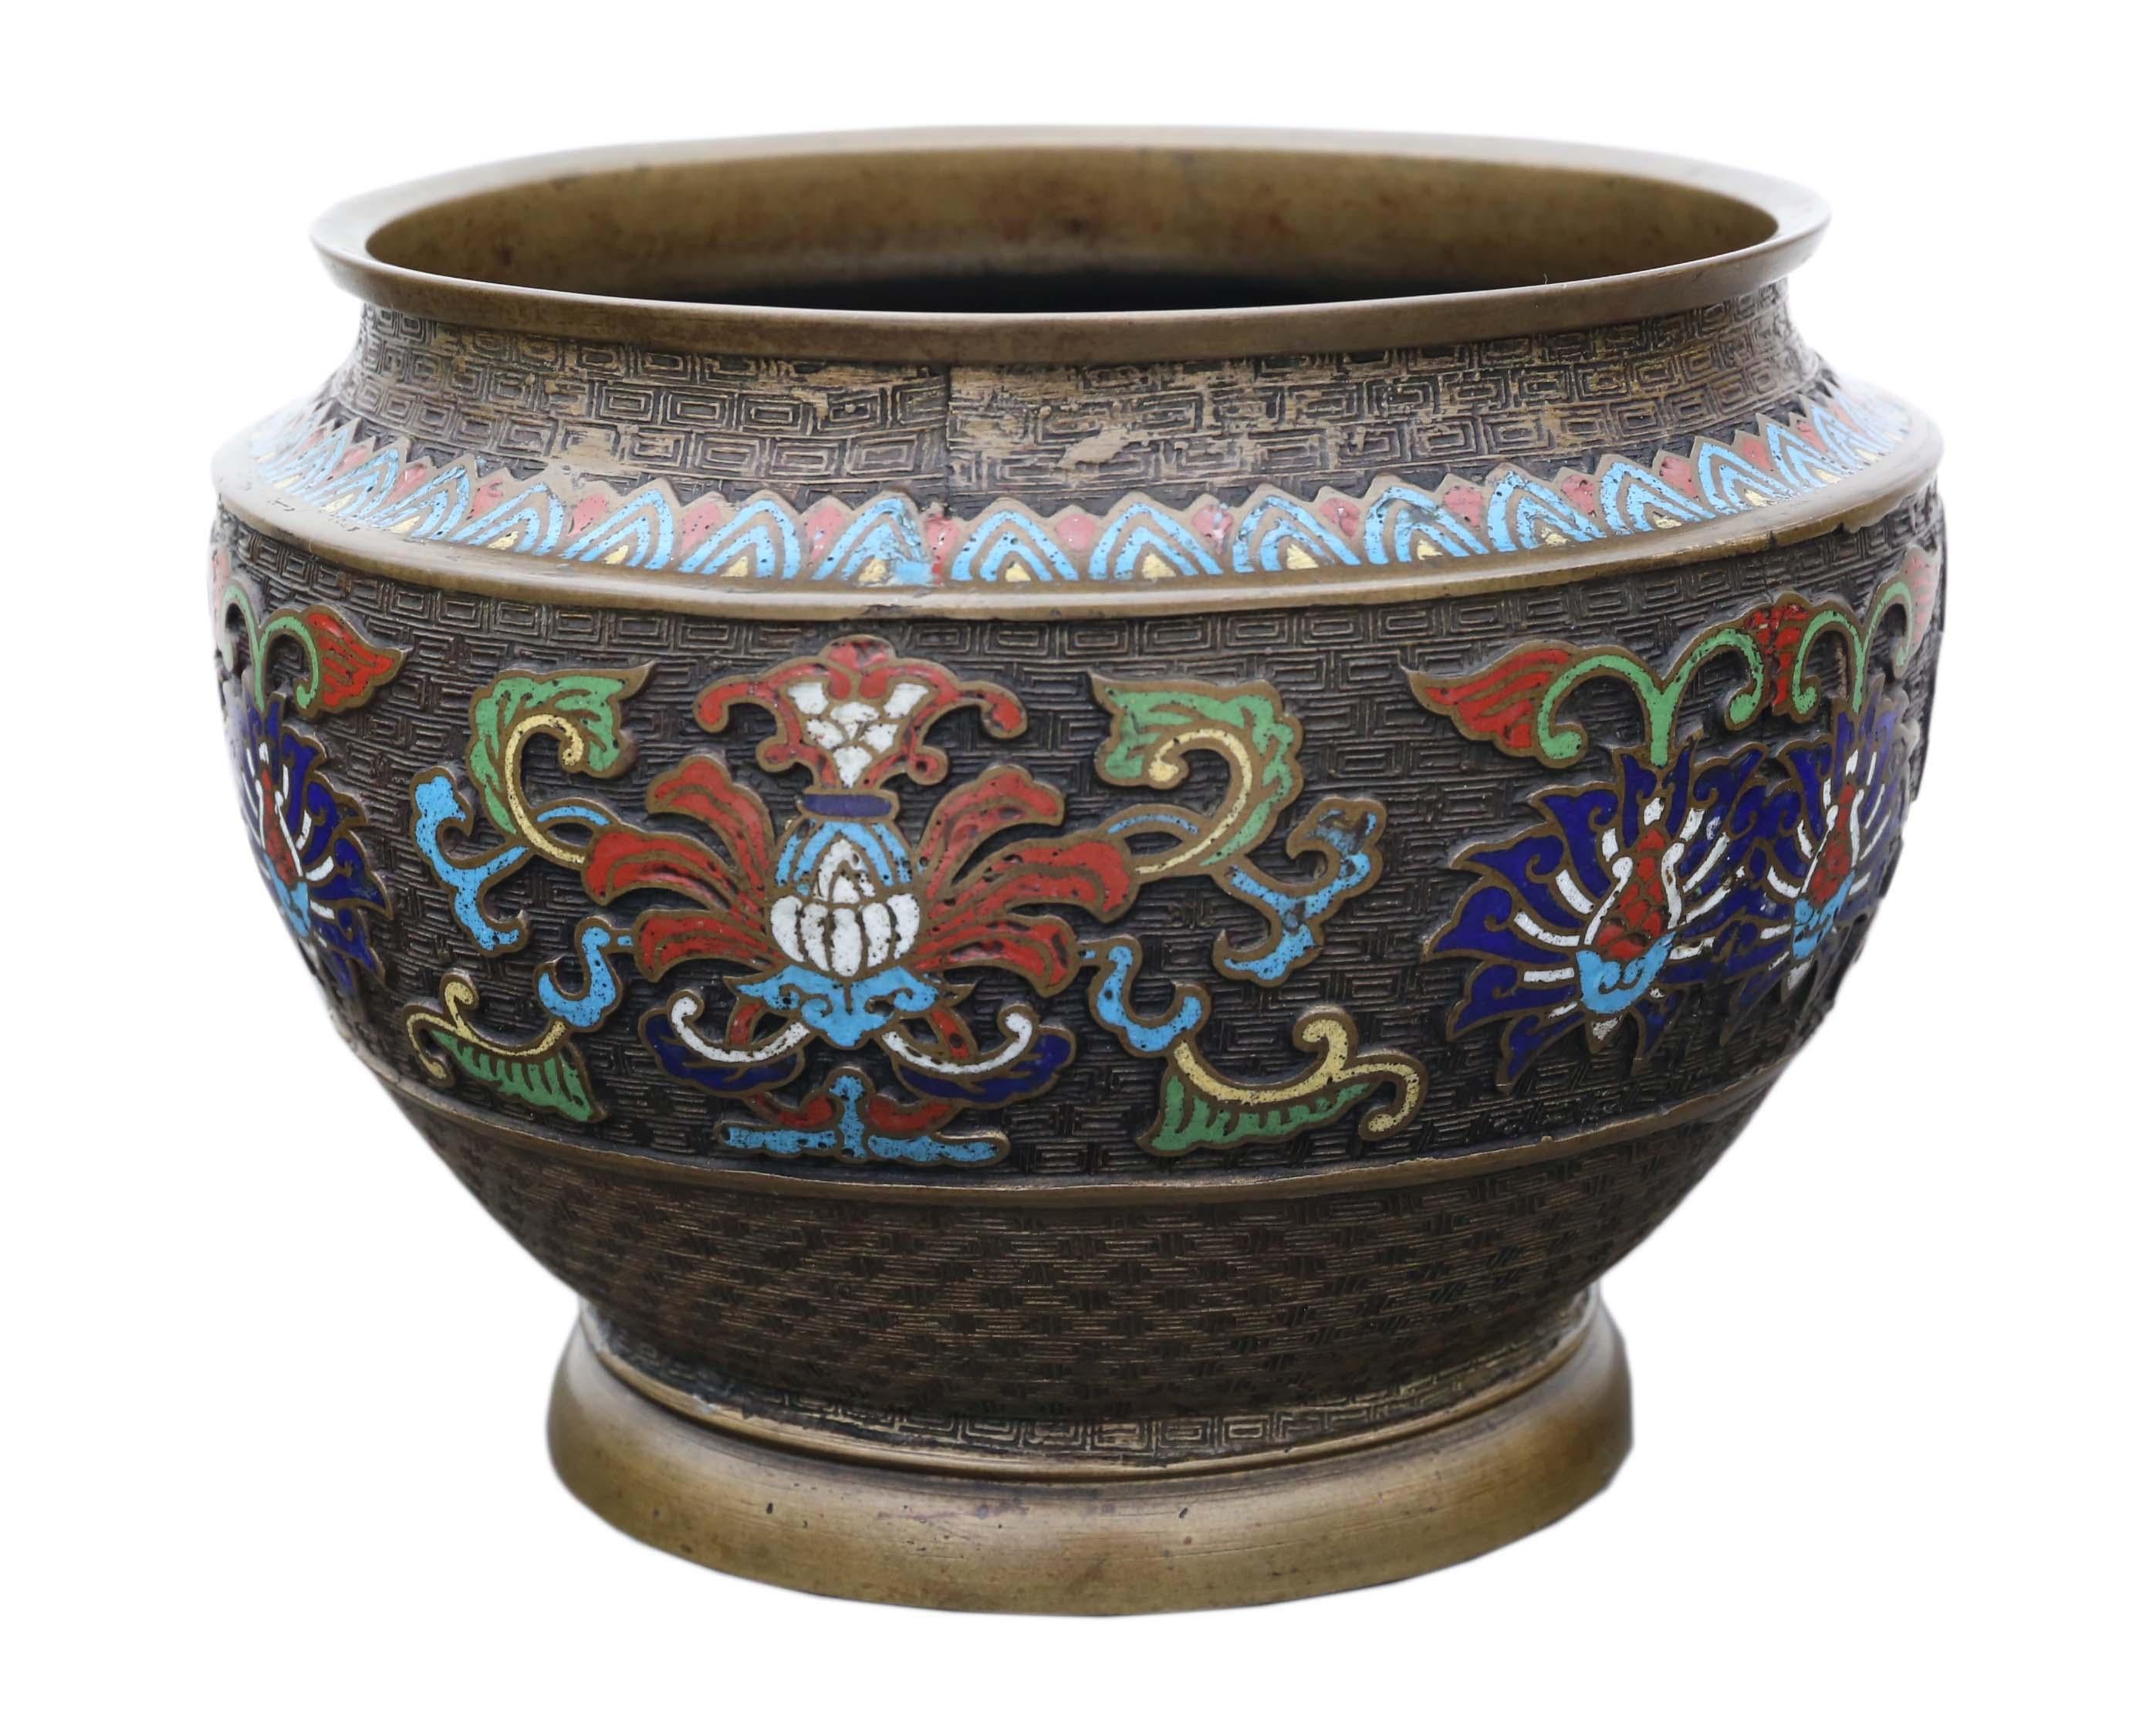 Antique large quality Chinese bronze cloisonne planter bowl, late 19th century.

Antique large quality Chinese bronze cloisonné planter bowl, late 19th century.

Overall maximum dimensions: 25cm diameter x 19cm high (19.5cm inner mouth). Weighs